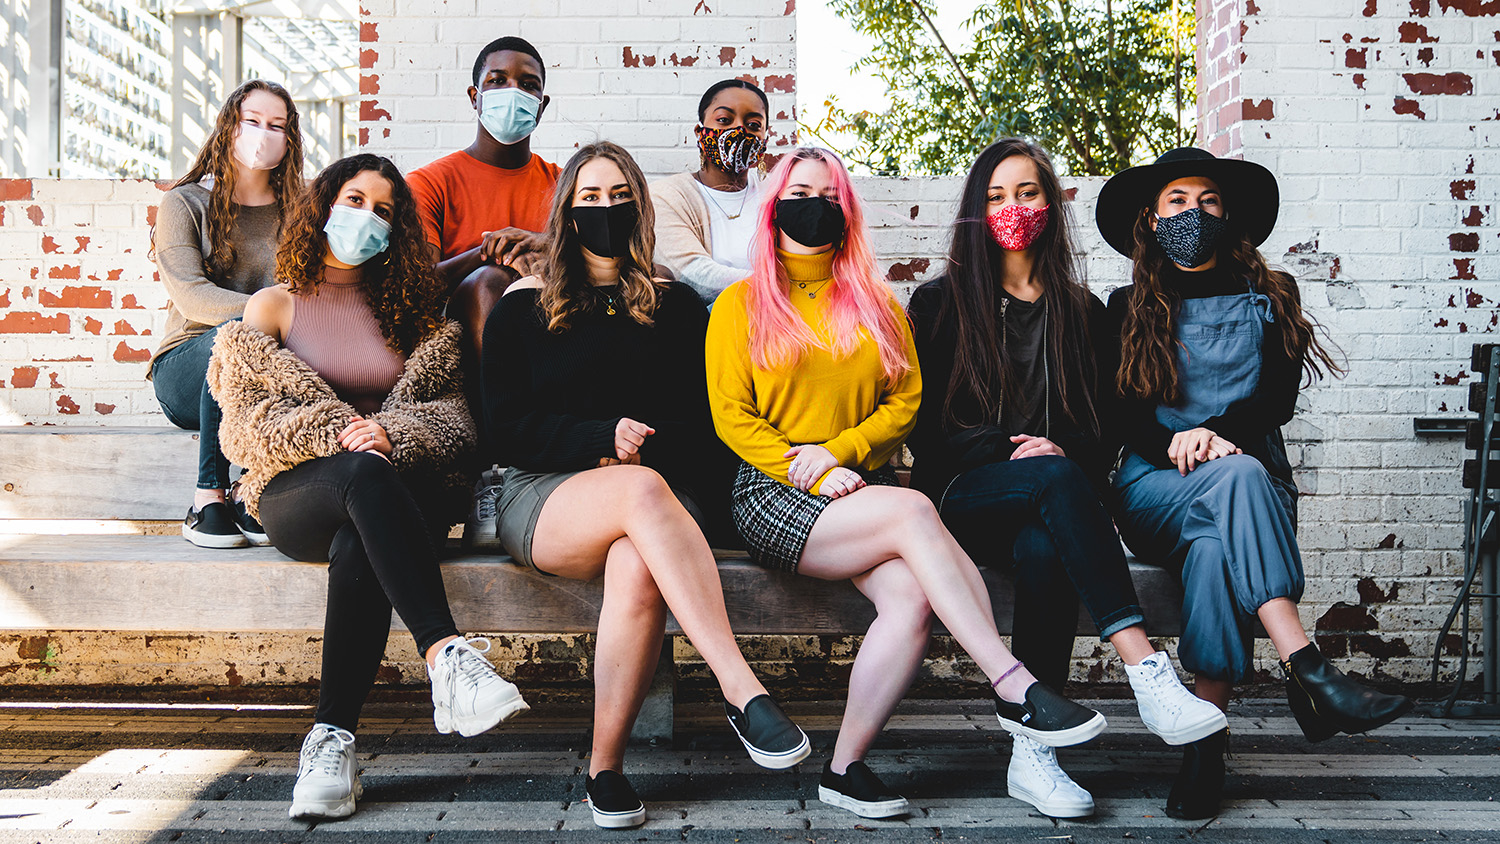 A group photo of 8 students from Fusion Dance Crew wearing protective face masks